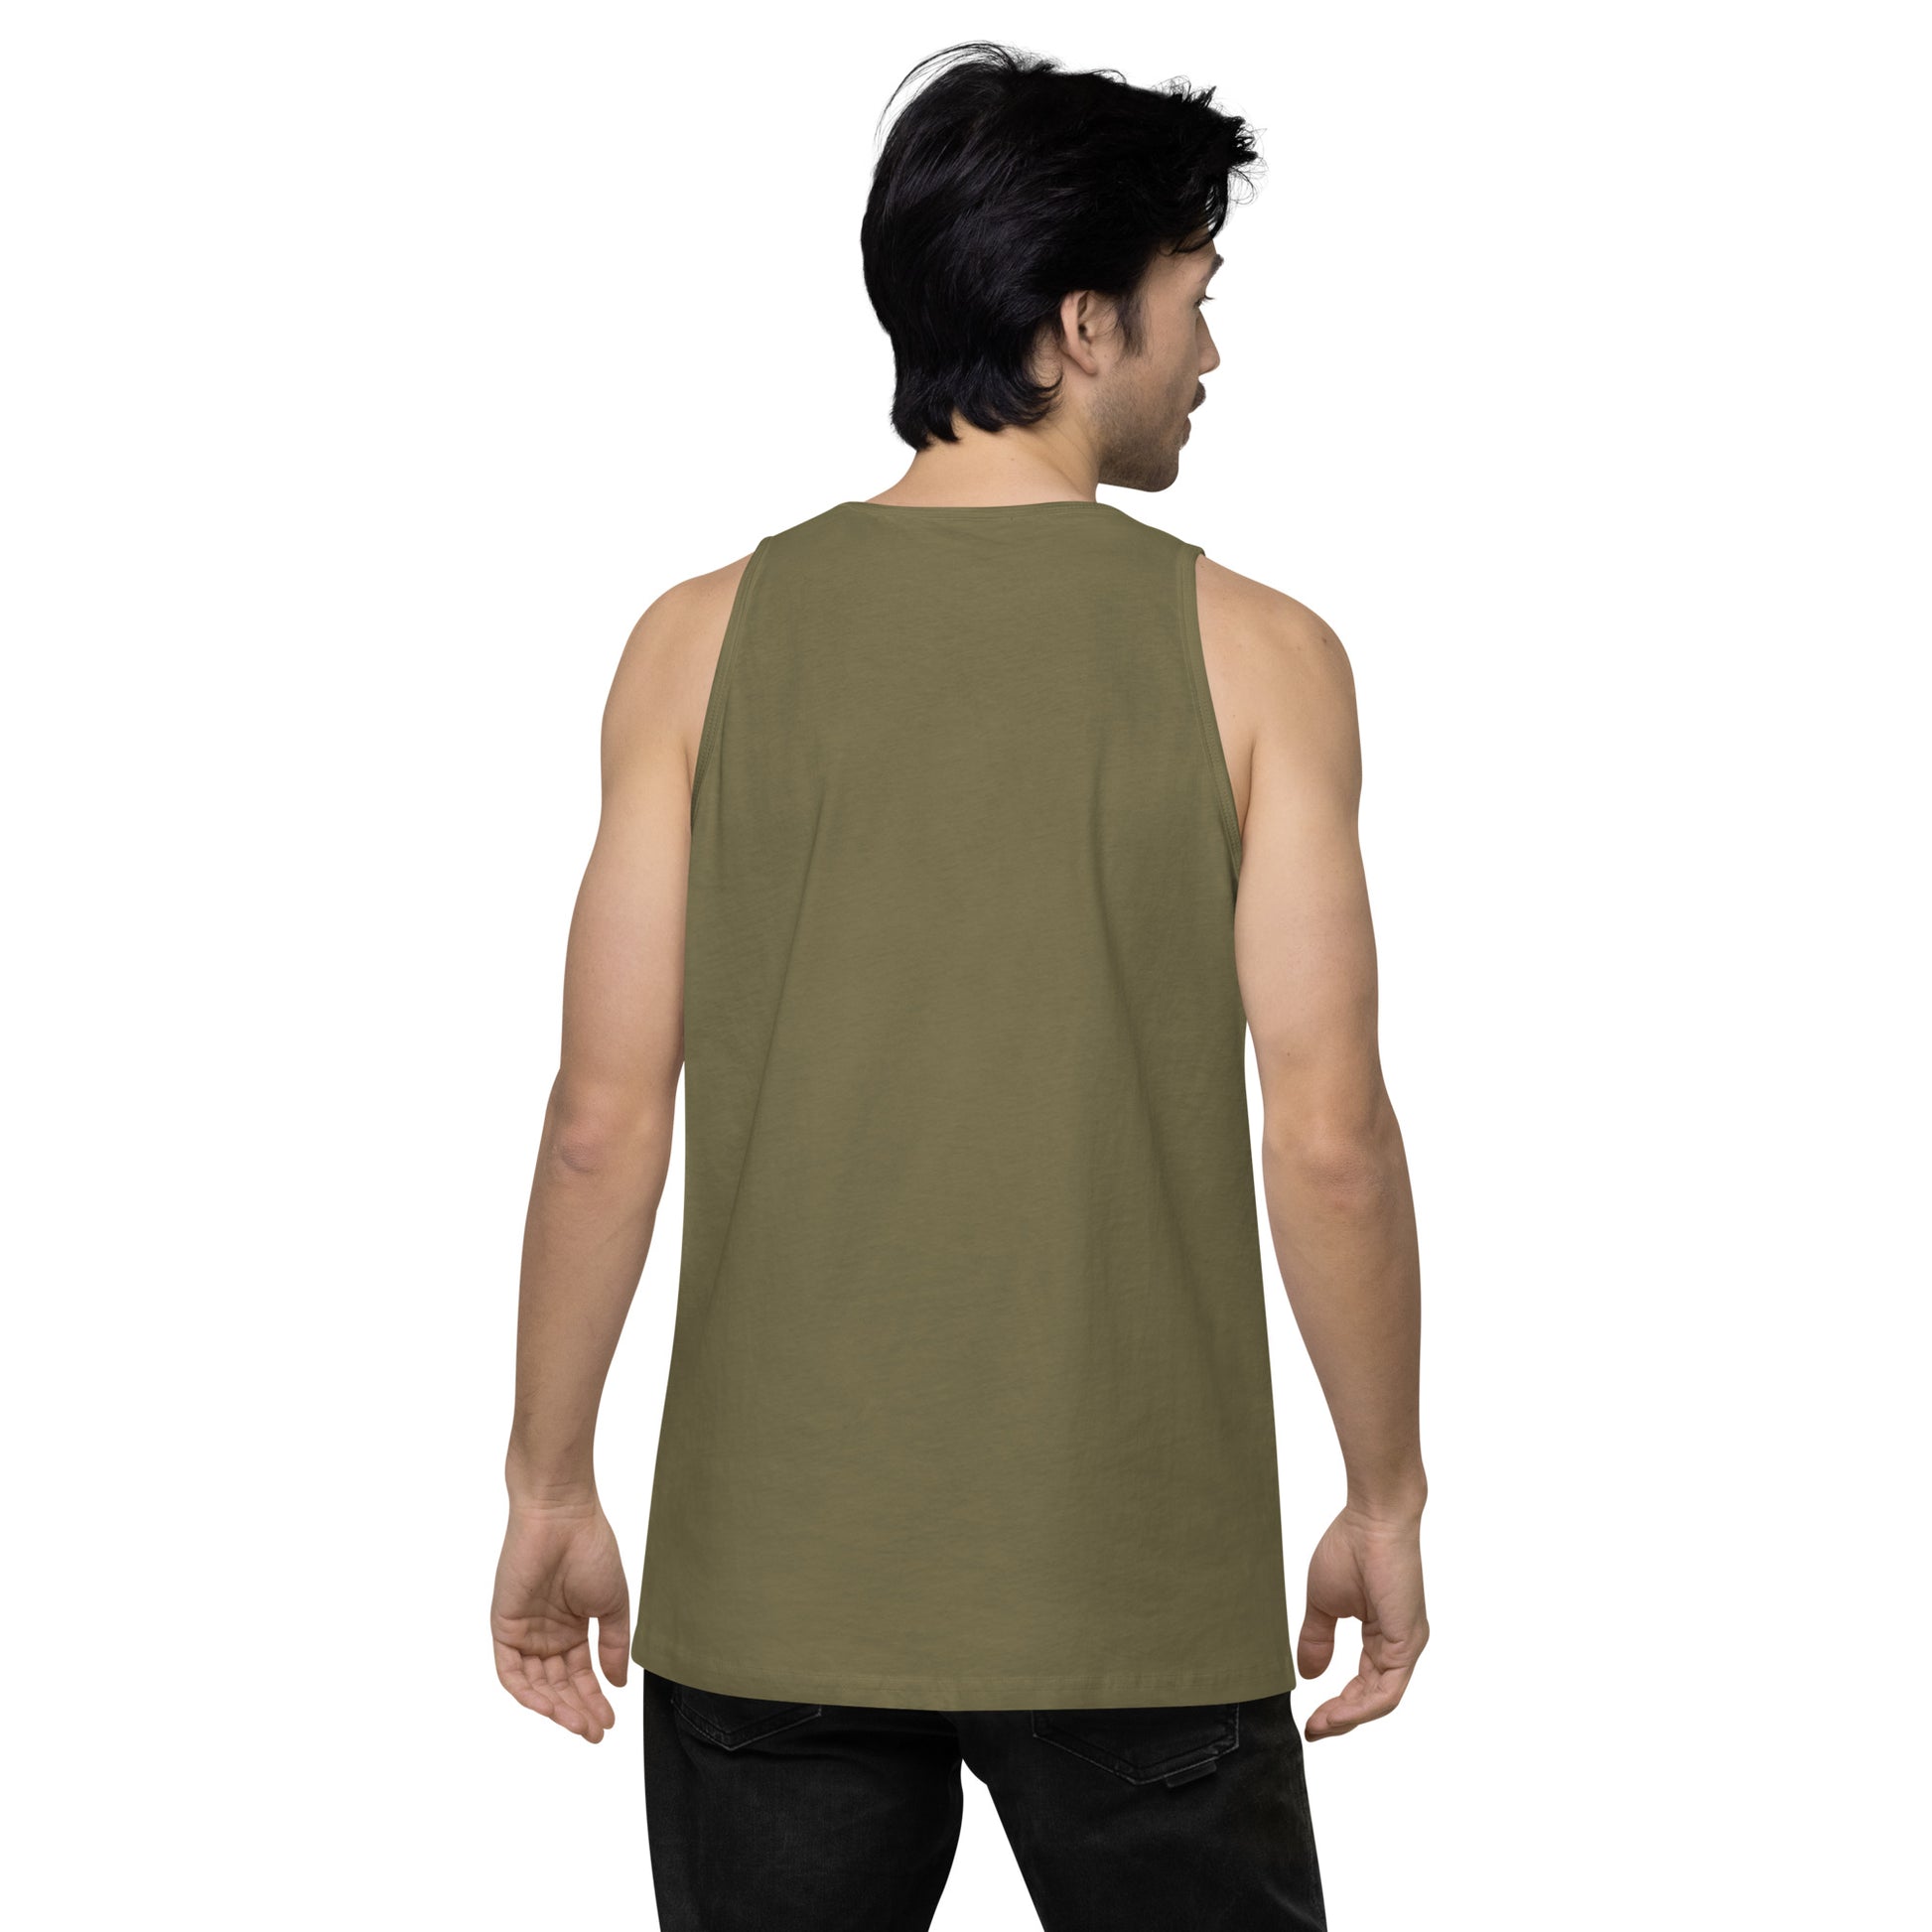 Betsy Ross men's tank top. Featuring the iconic 13 stars design, this tank is perfect for anyone who loves America and its rich history. Military Green and white.